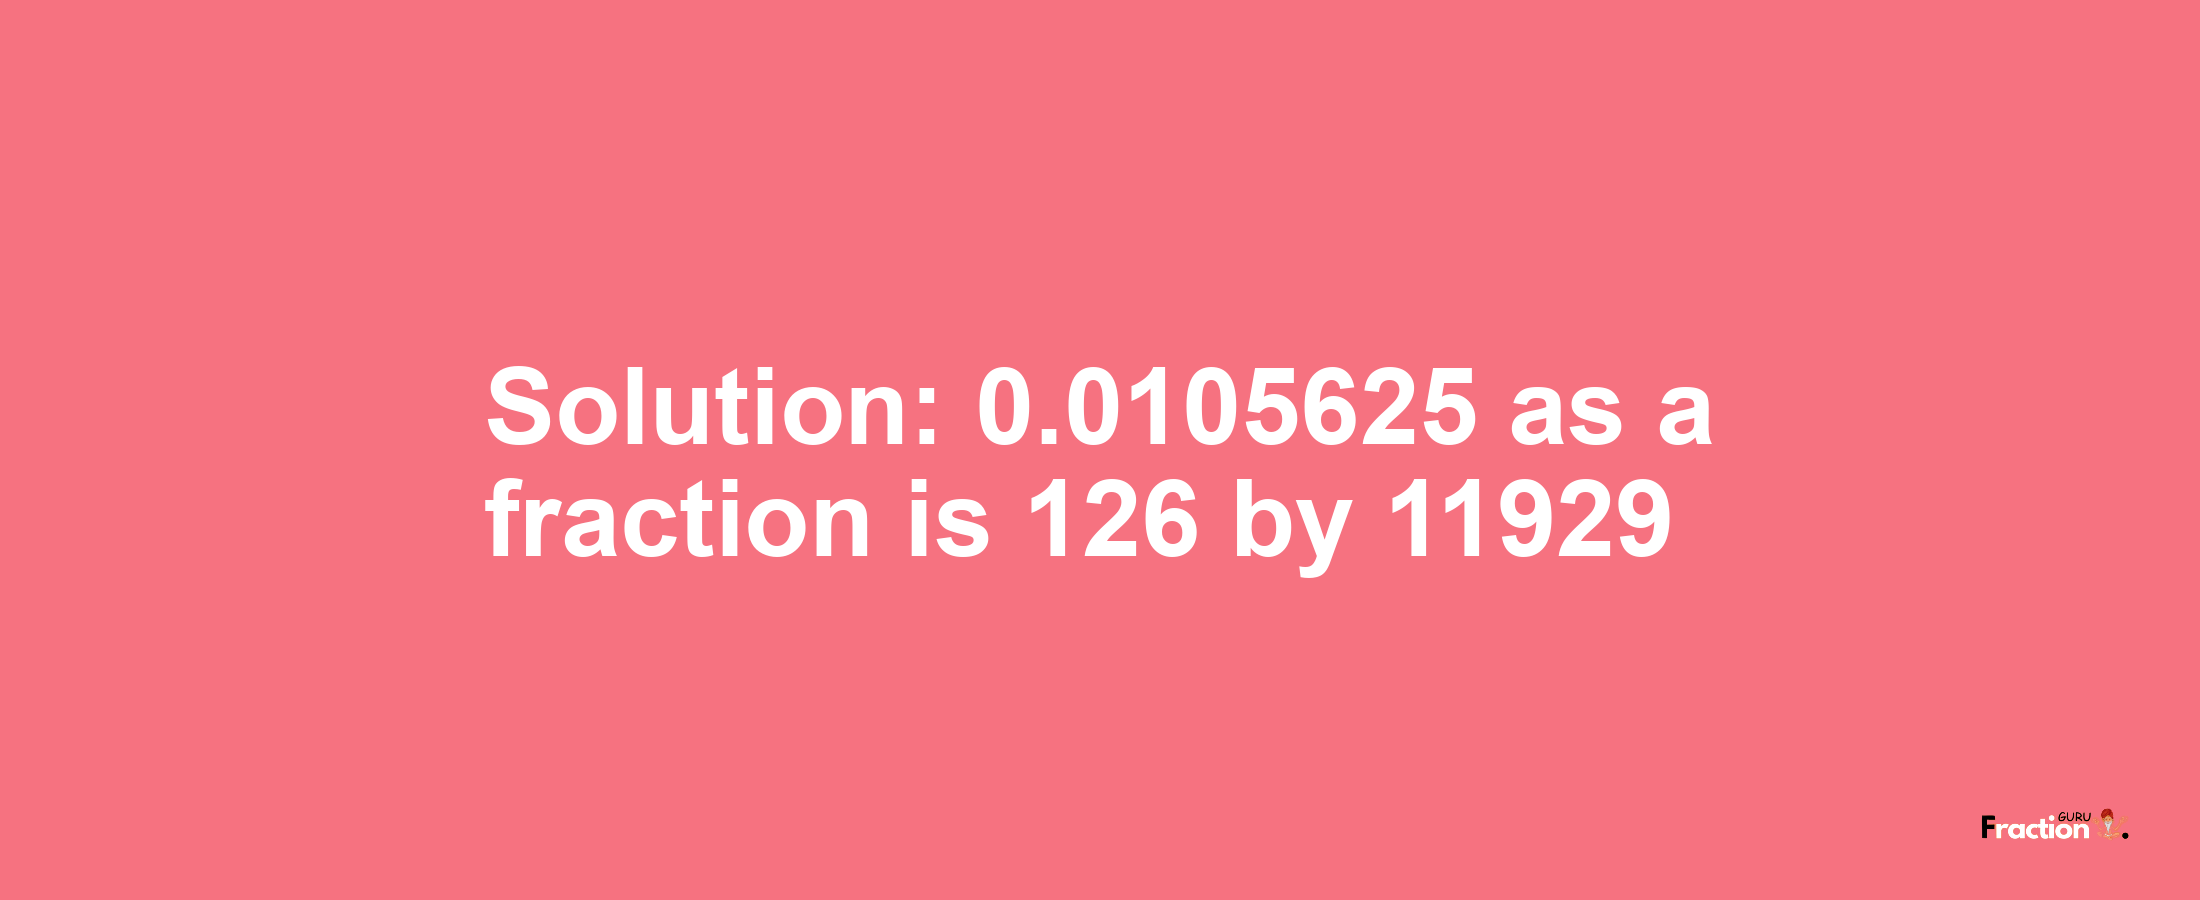 Solution:0.0105625 as a fraction is 126/11929